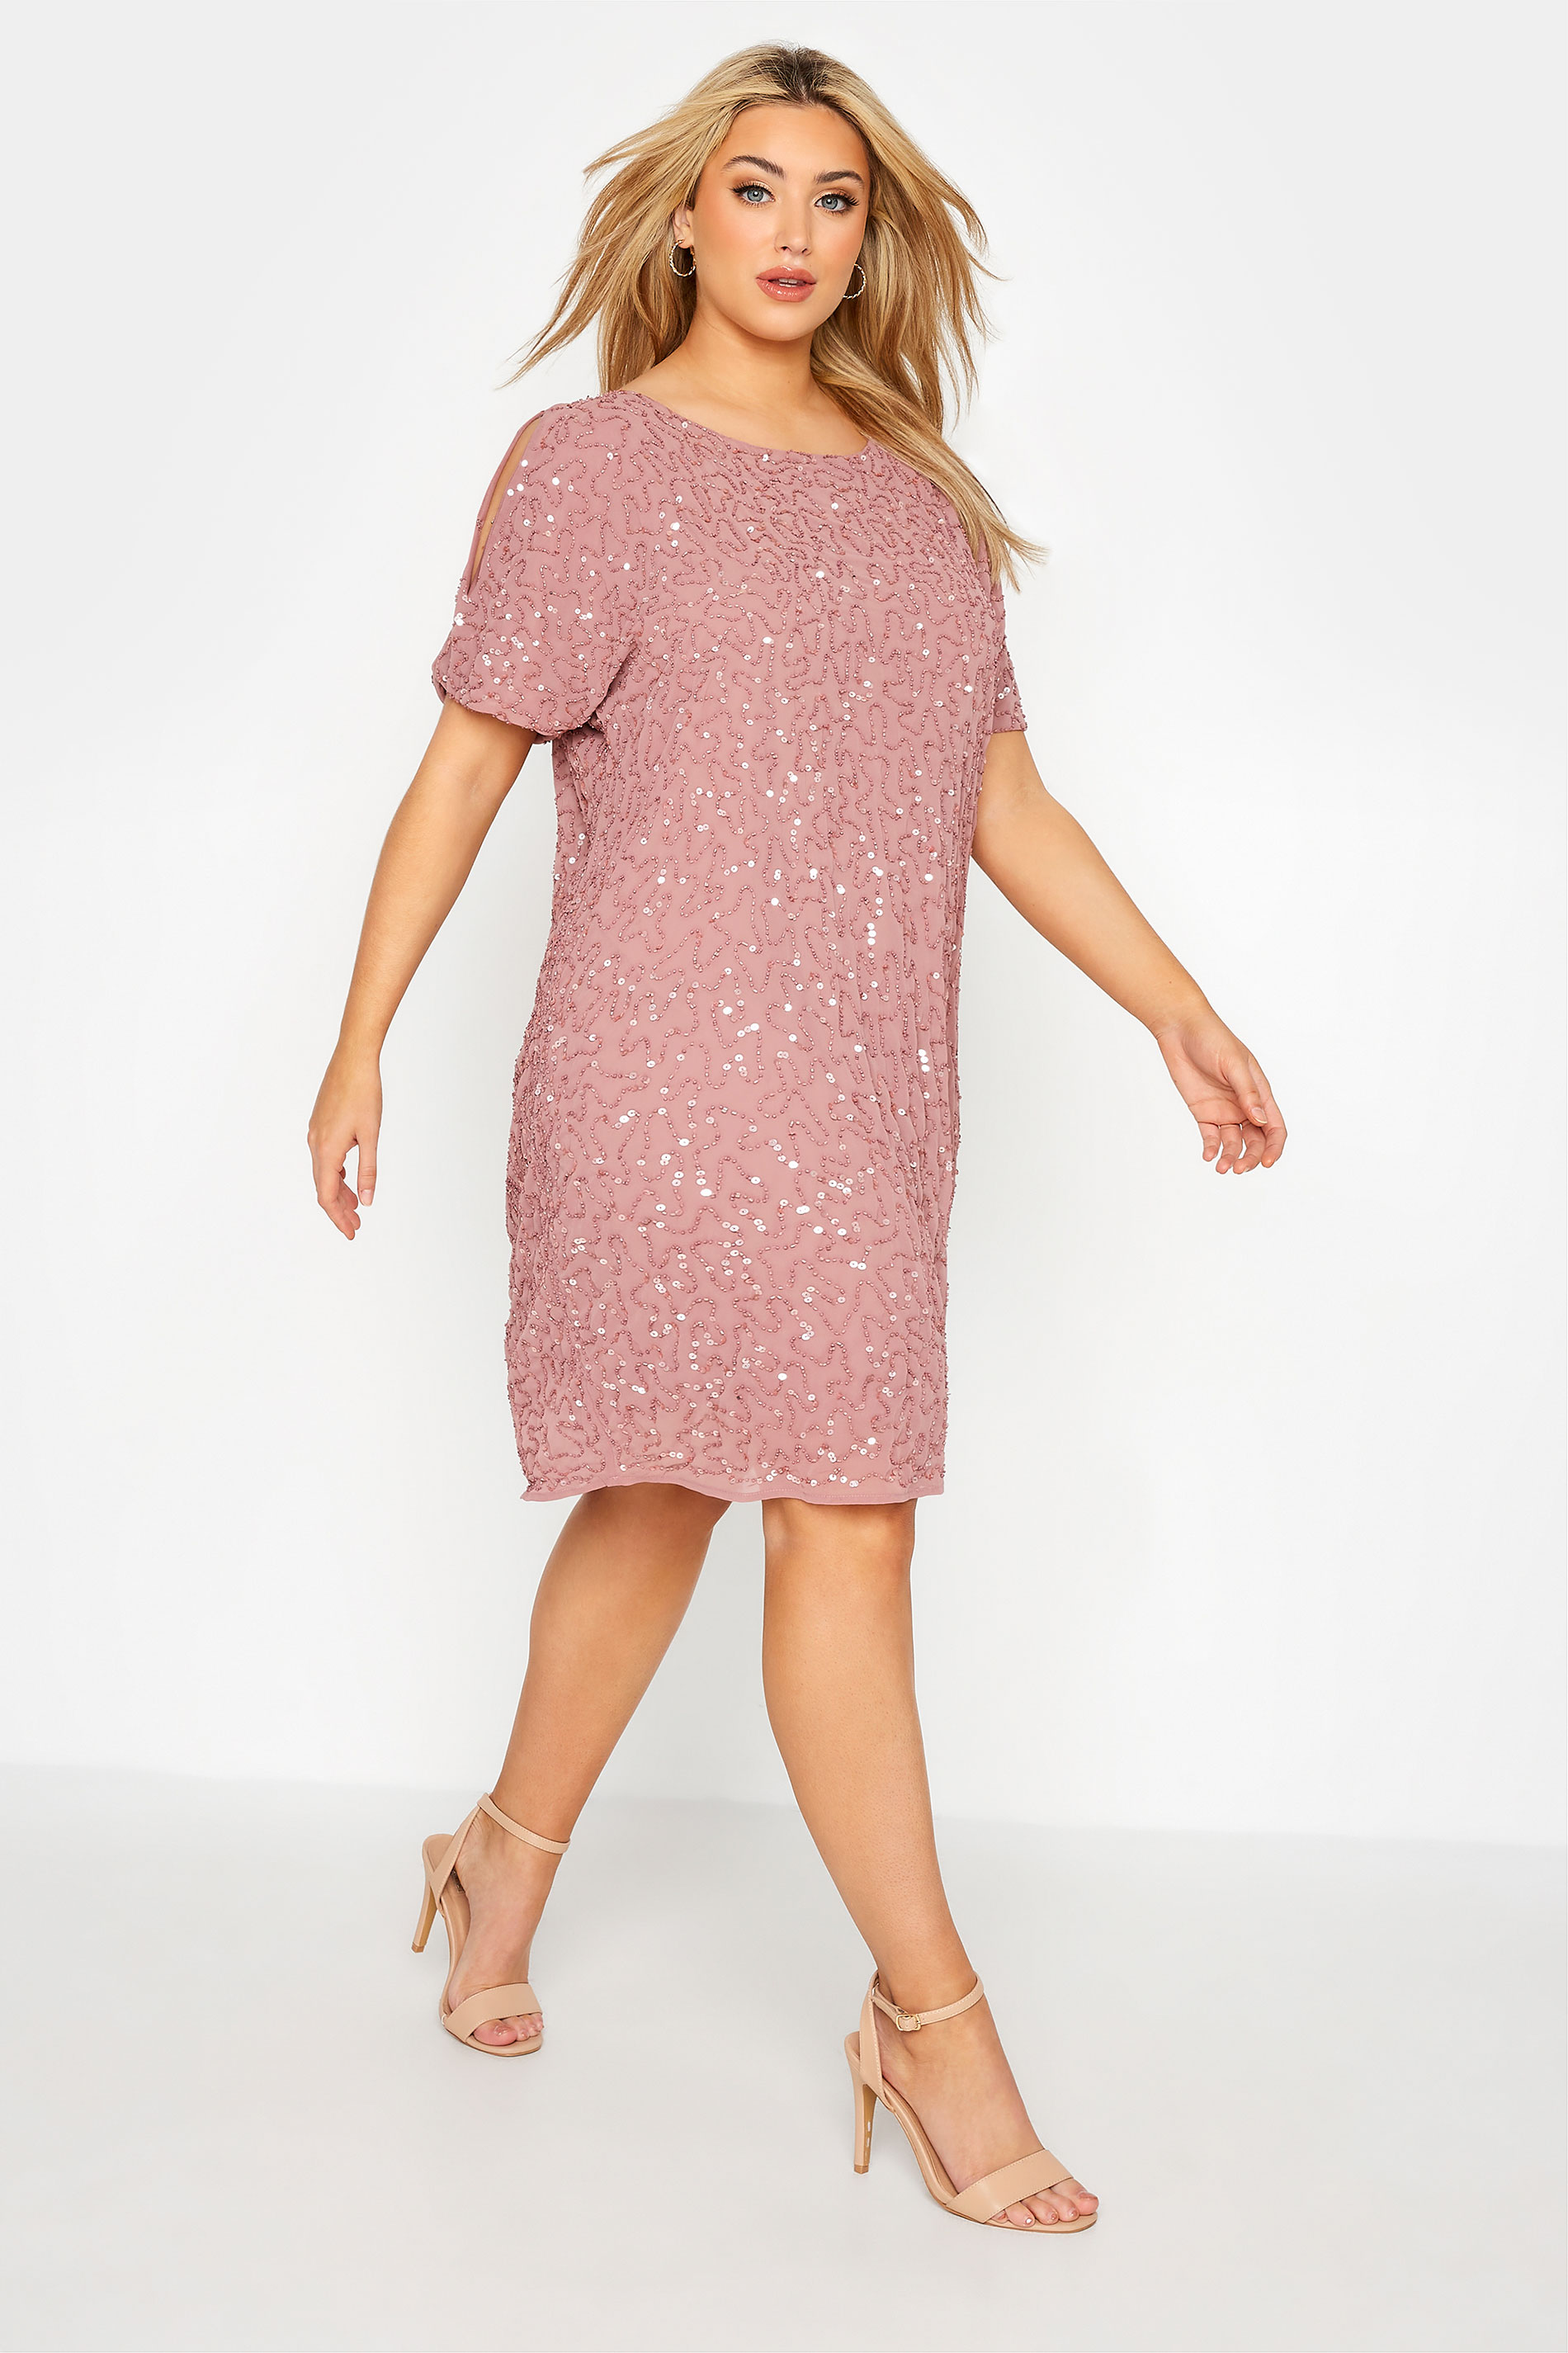 LUXE Plus Size Light Pink Sequin Hand Embellished Cape Dress | Yours Clothing 1